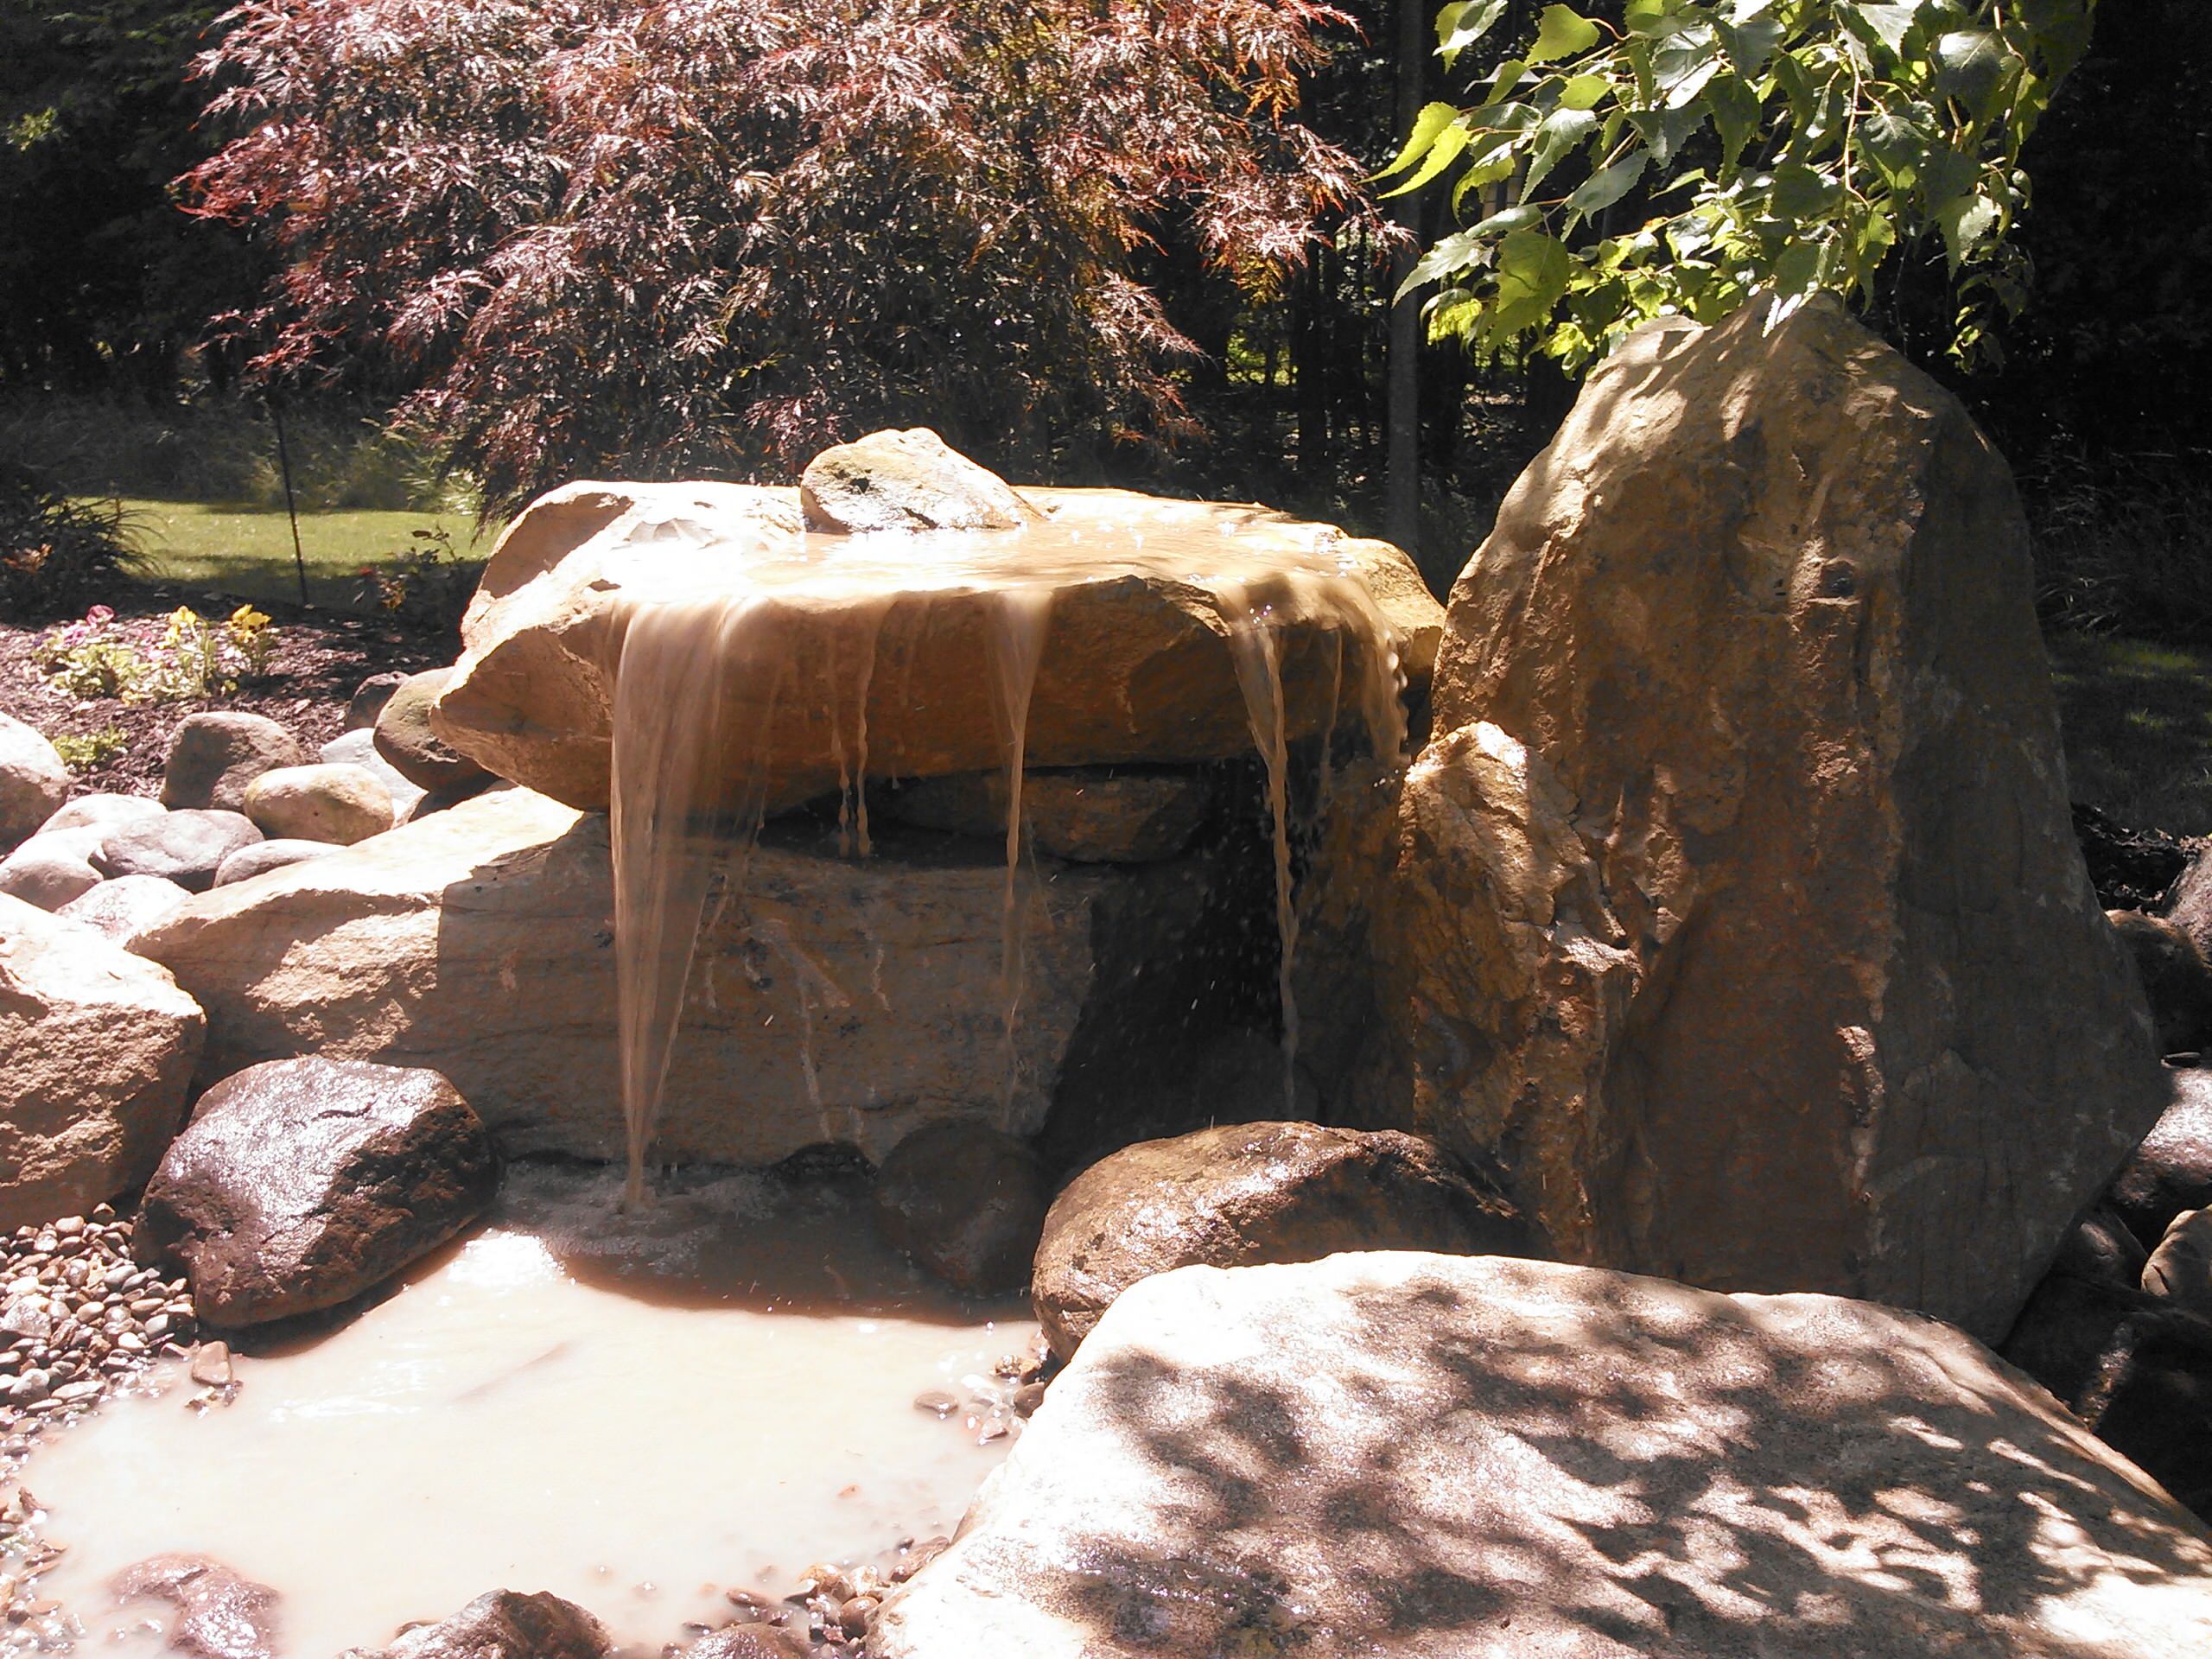 Carved stone water features